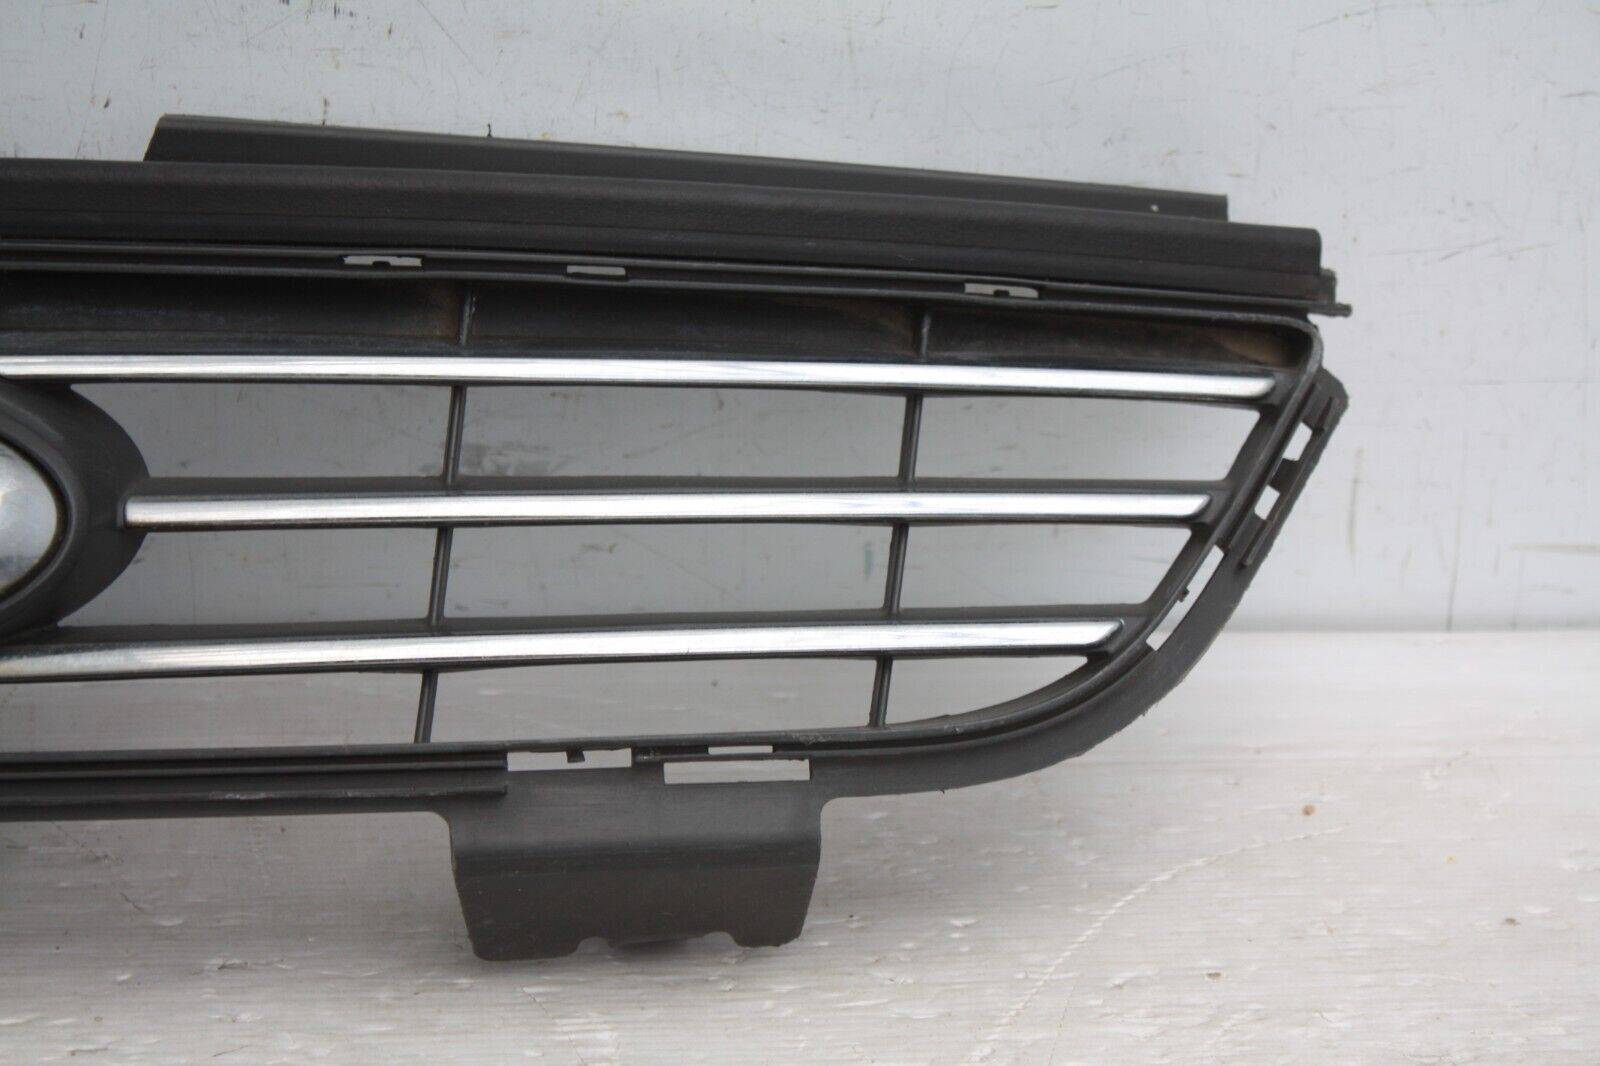 Ford-Galaxy-Front-Bumper-Grill-2010-to-2015-AM21-8200-A-Genuine-176065768256-2